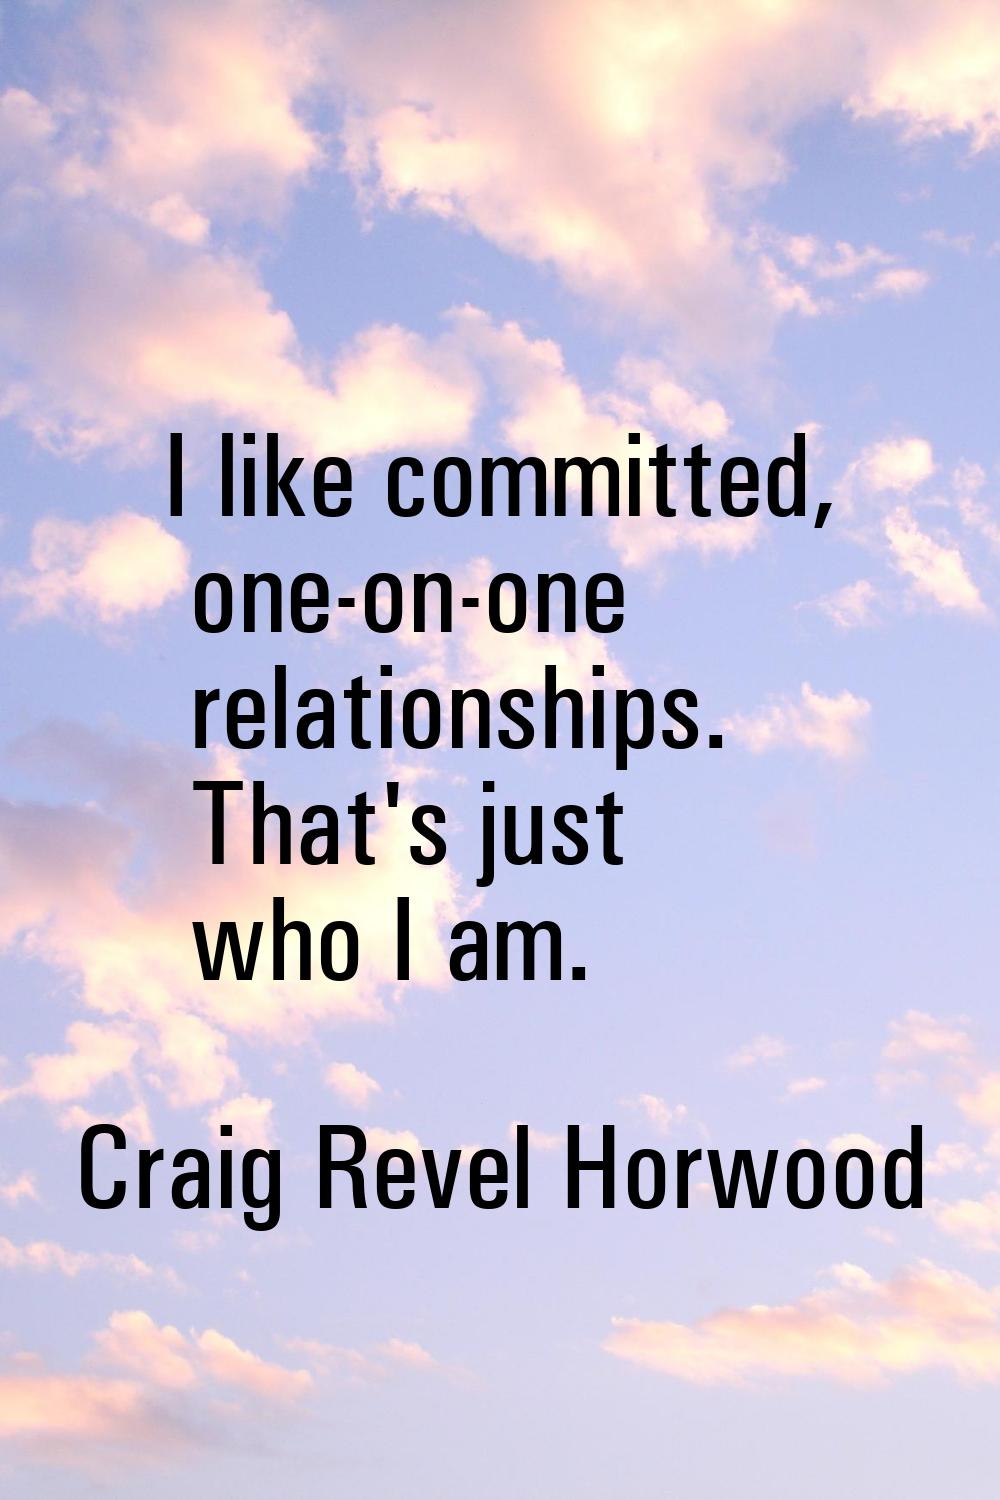 I like committed, one-on-one relationships. That's just who I am.